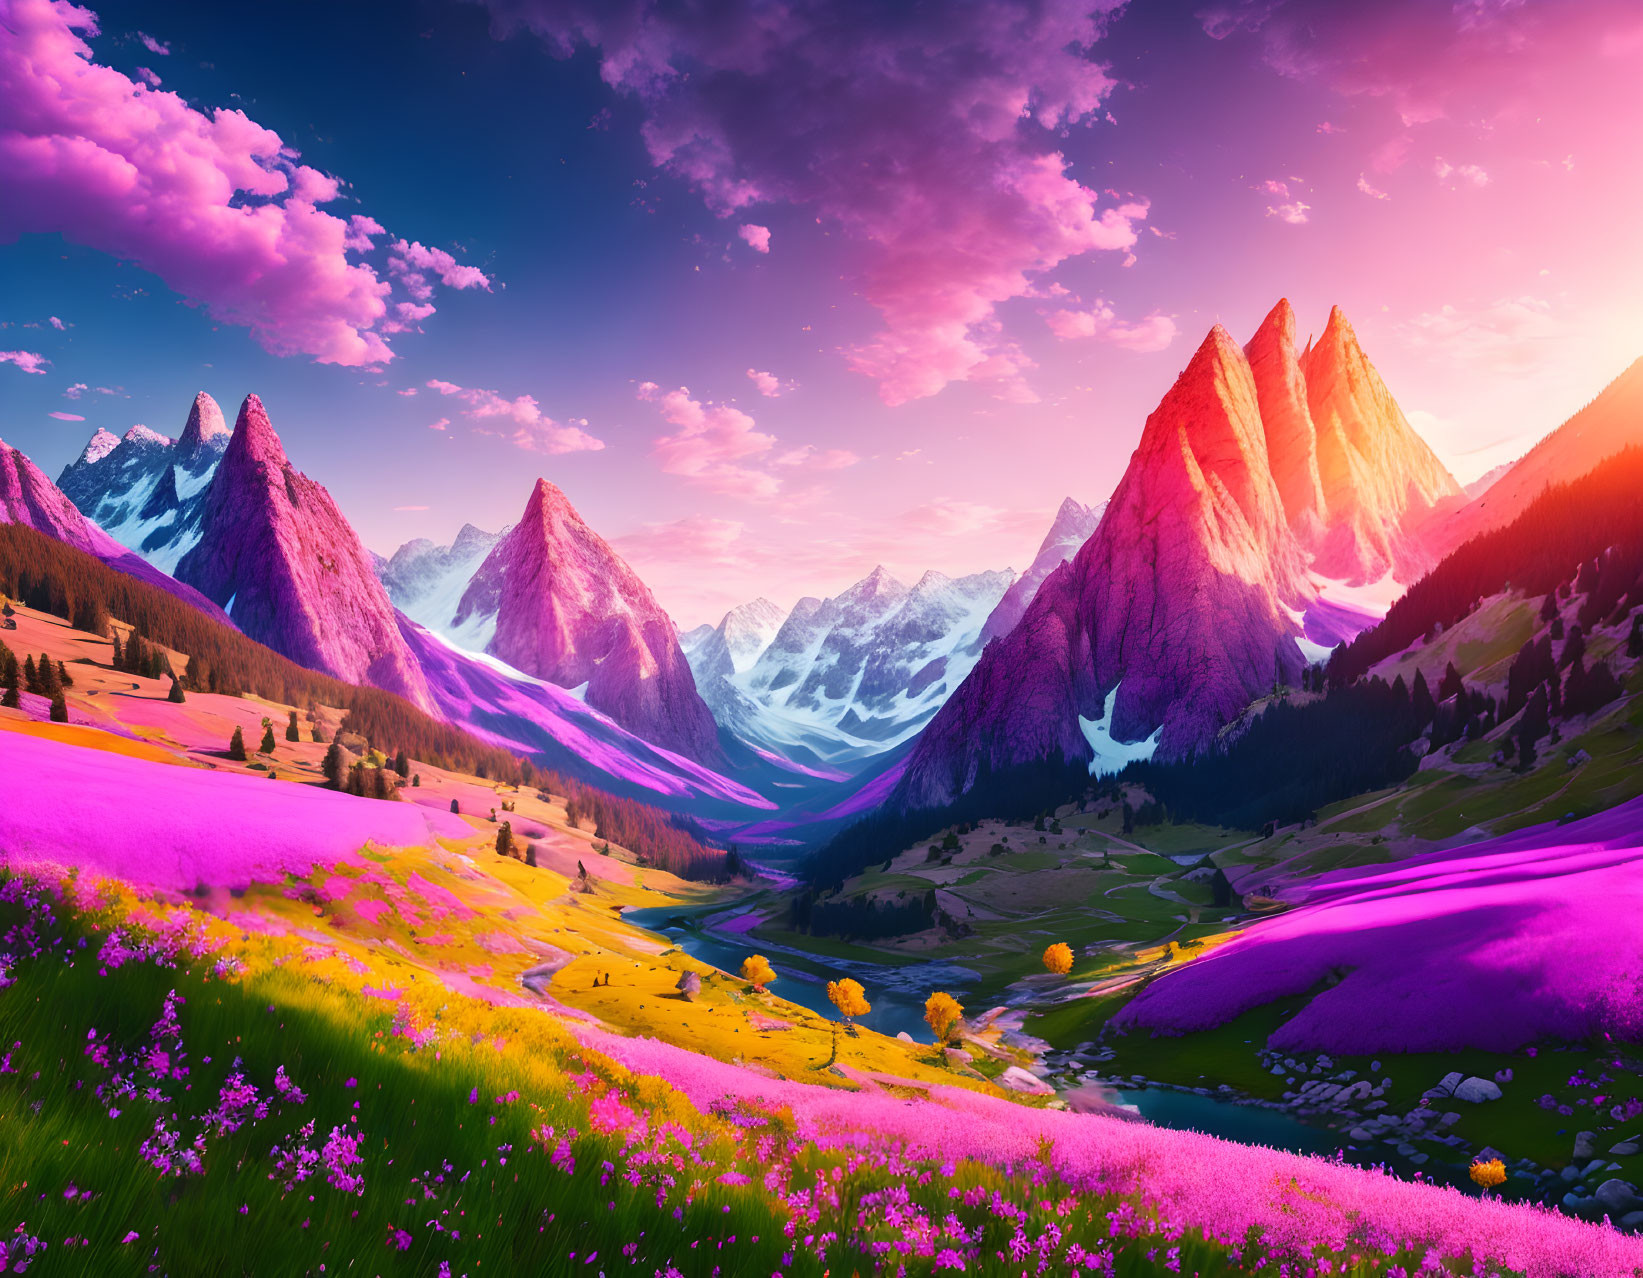 Colorful Landscape with Pink Fields, Sunset Sky, Mountains, and River